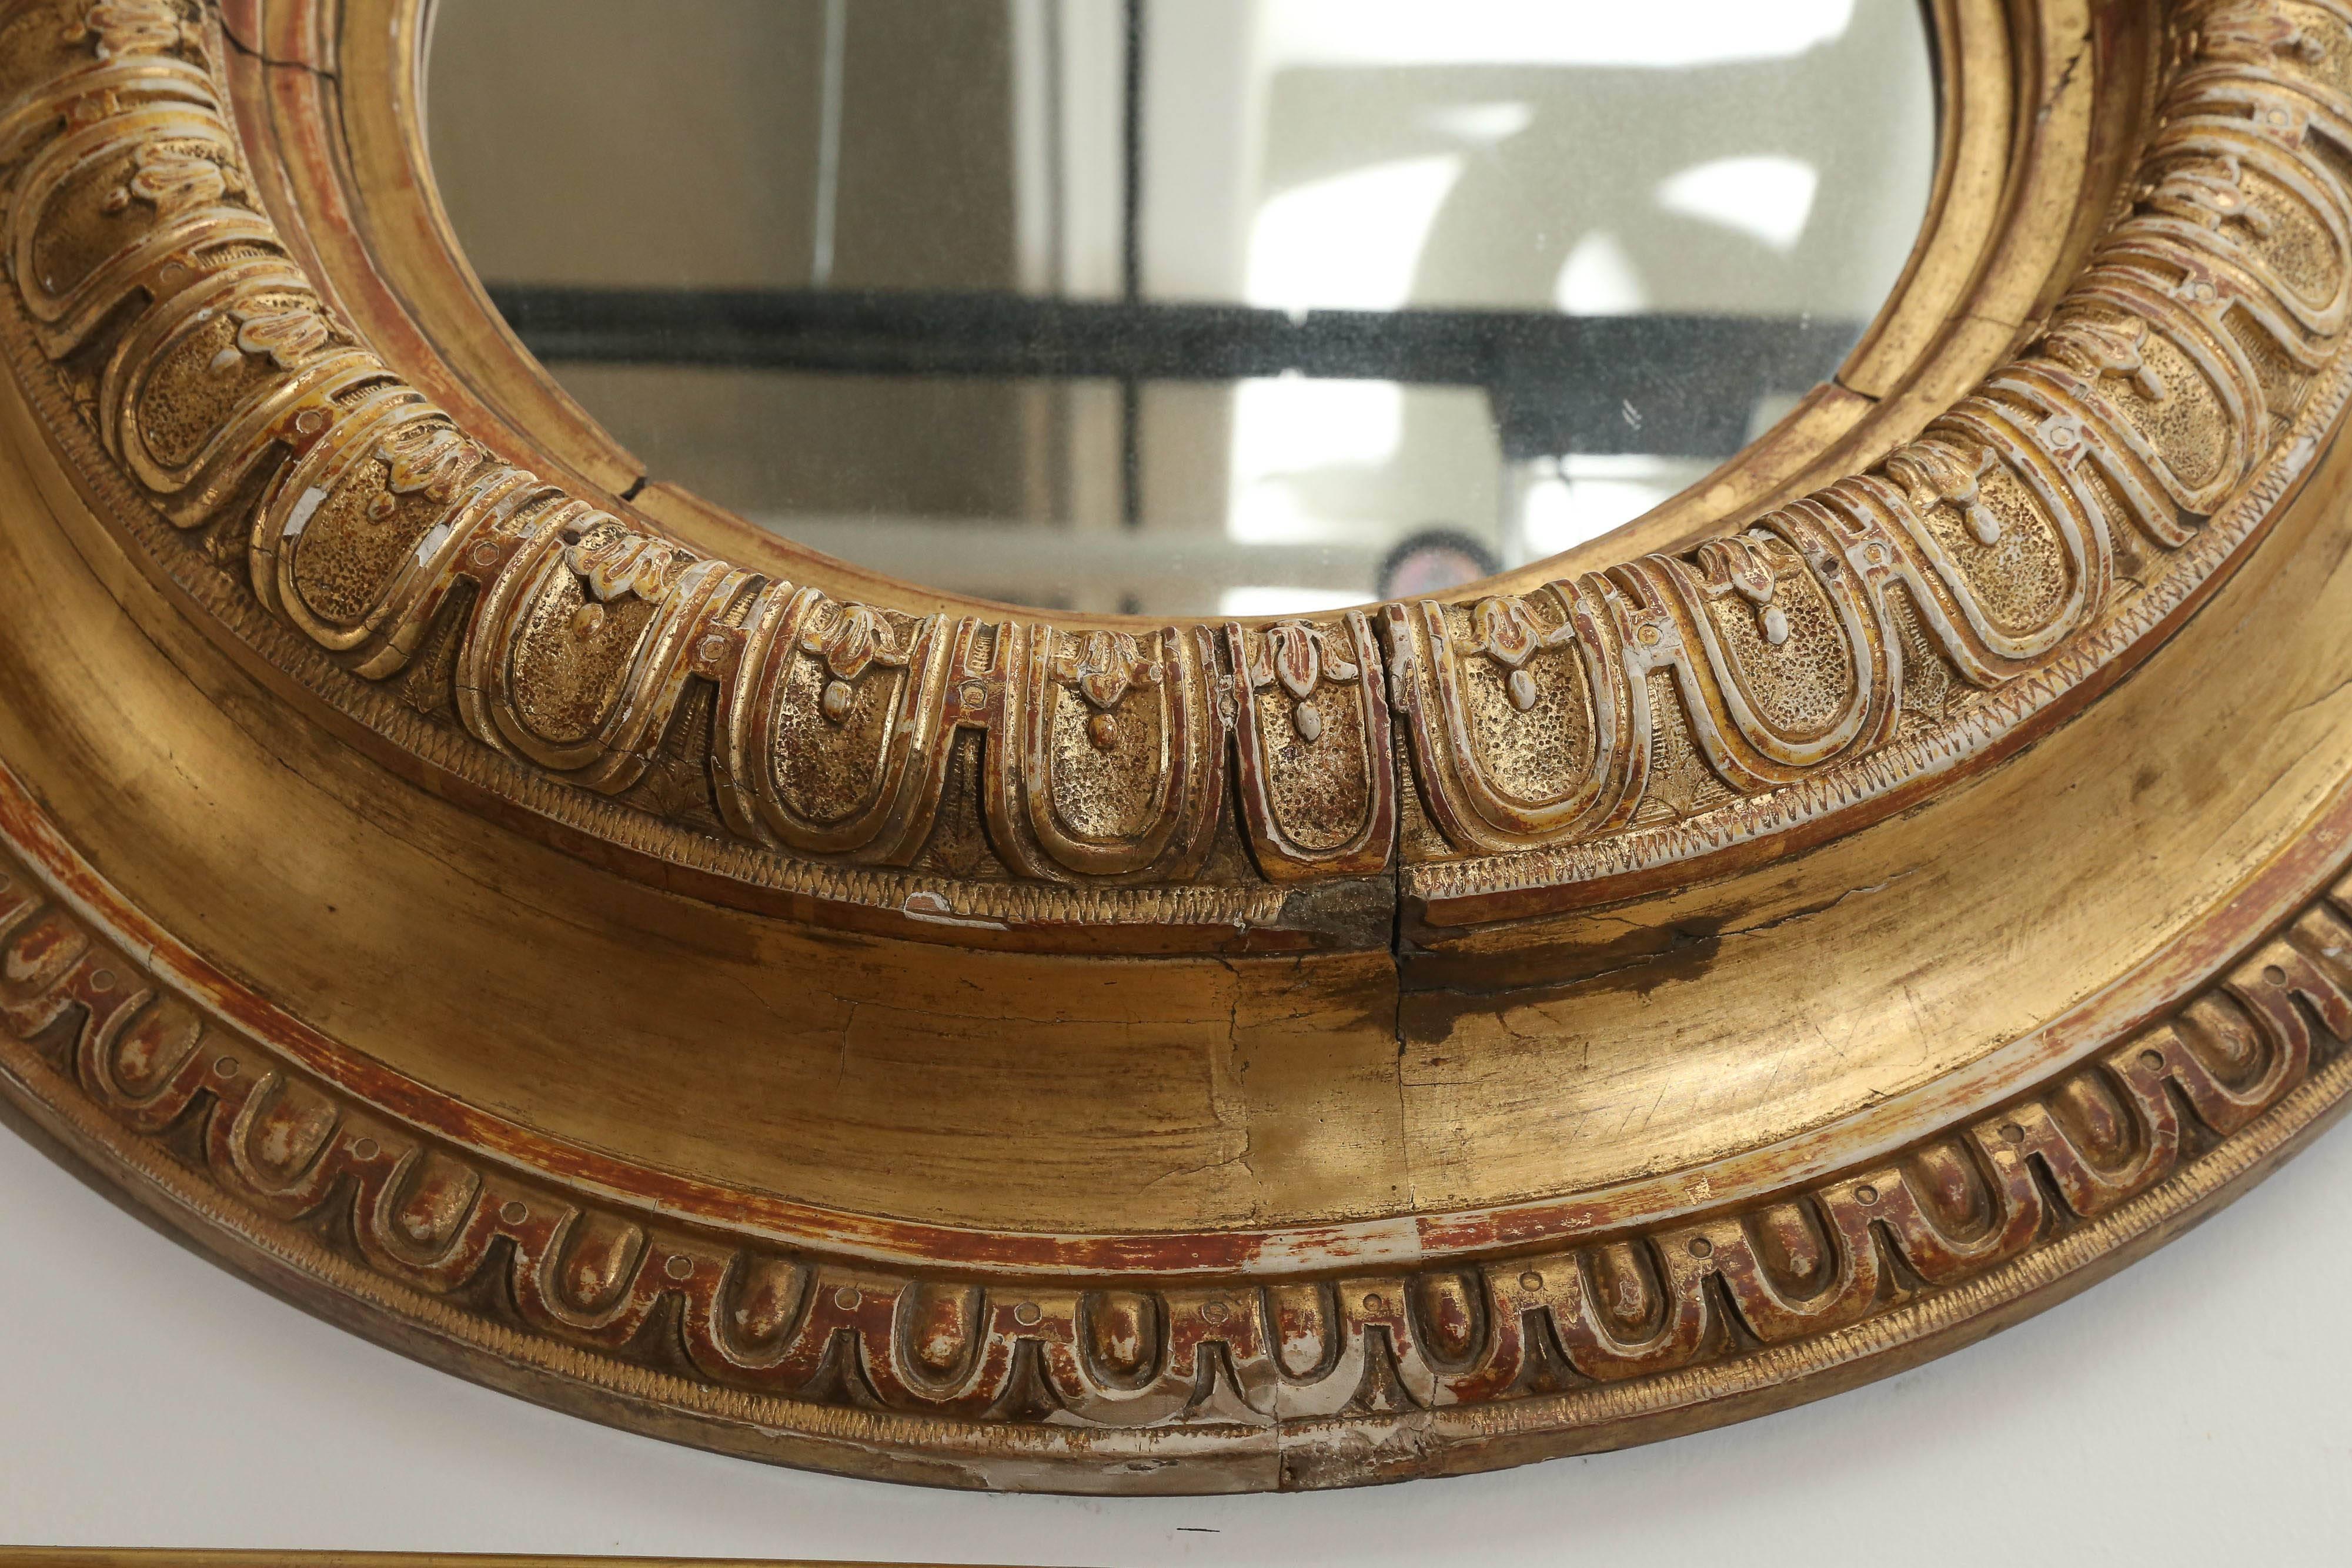 Fantastic round gilt mirror from the 18th century. Some losses to detail but does not detract. Beautiful gilt and detail throughout. Original mercury glass.  Great 3 dimensional feel.